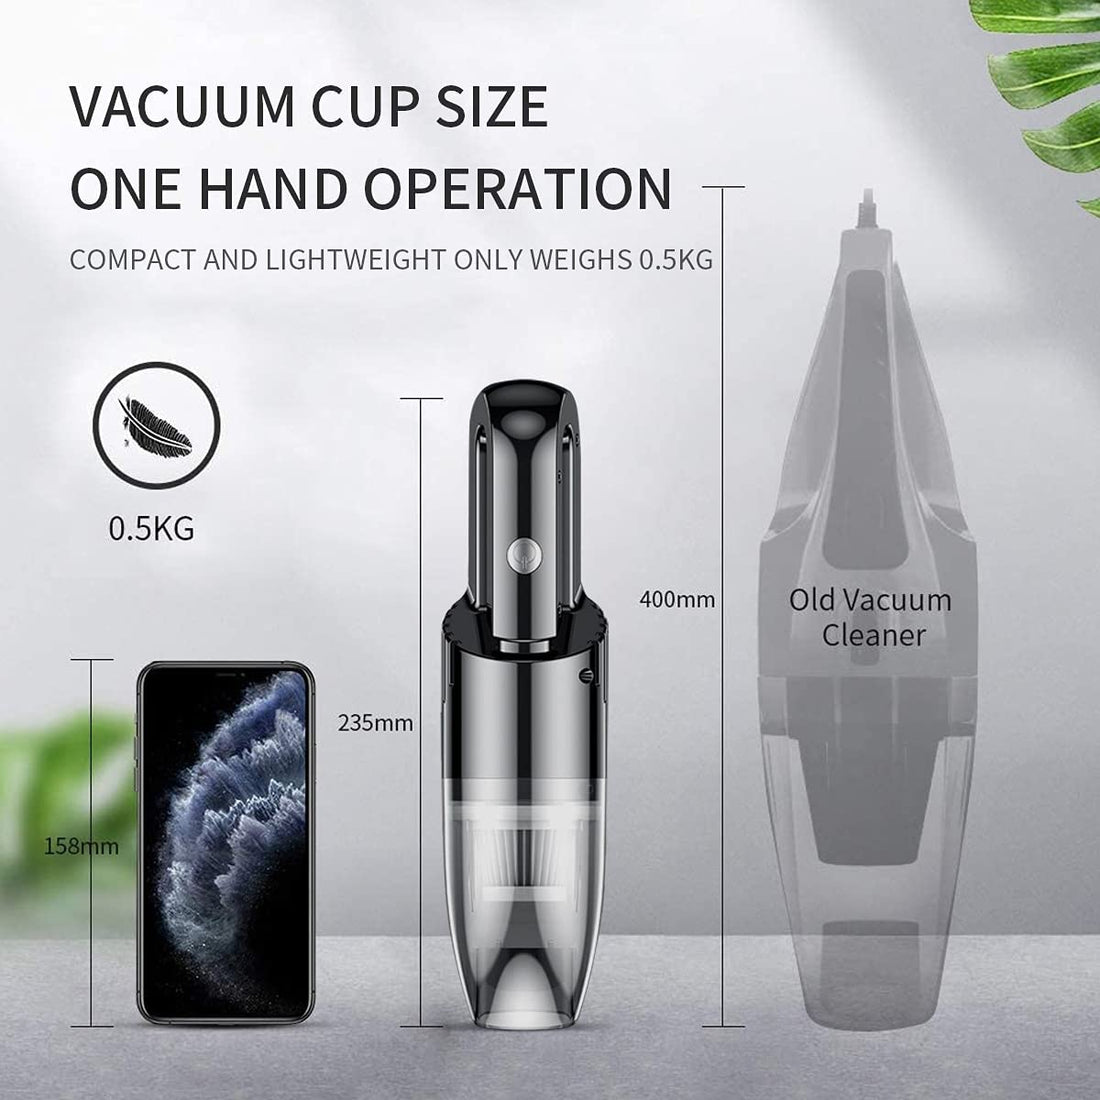 Handheld Vacuum Cordless,Mini Hand Vacuum Cleaner,Portable Vacuum with Light Weight,Wet Dry Hand Held Vacuuming Rechargeable for Pet Hair,Home, Office and Car